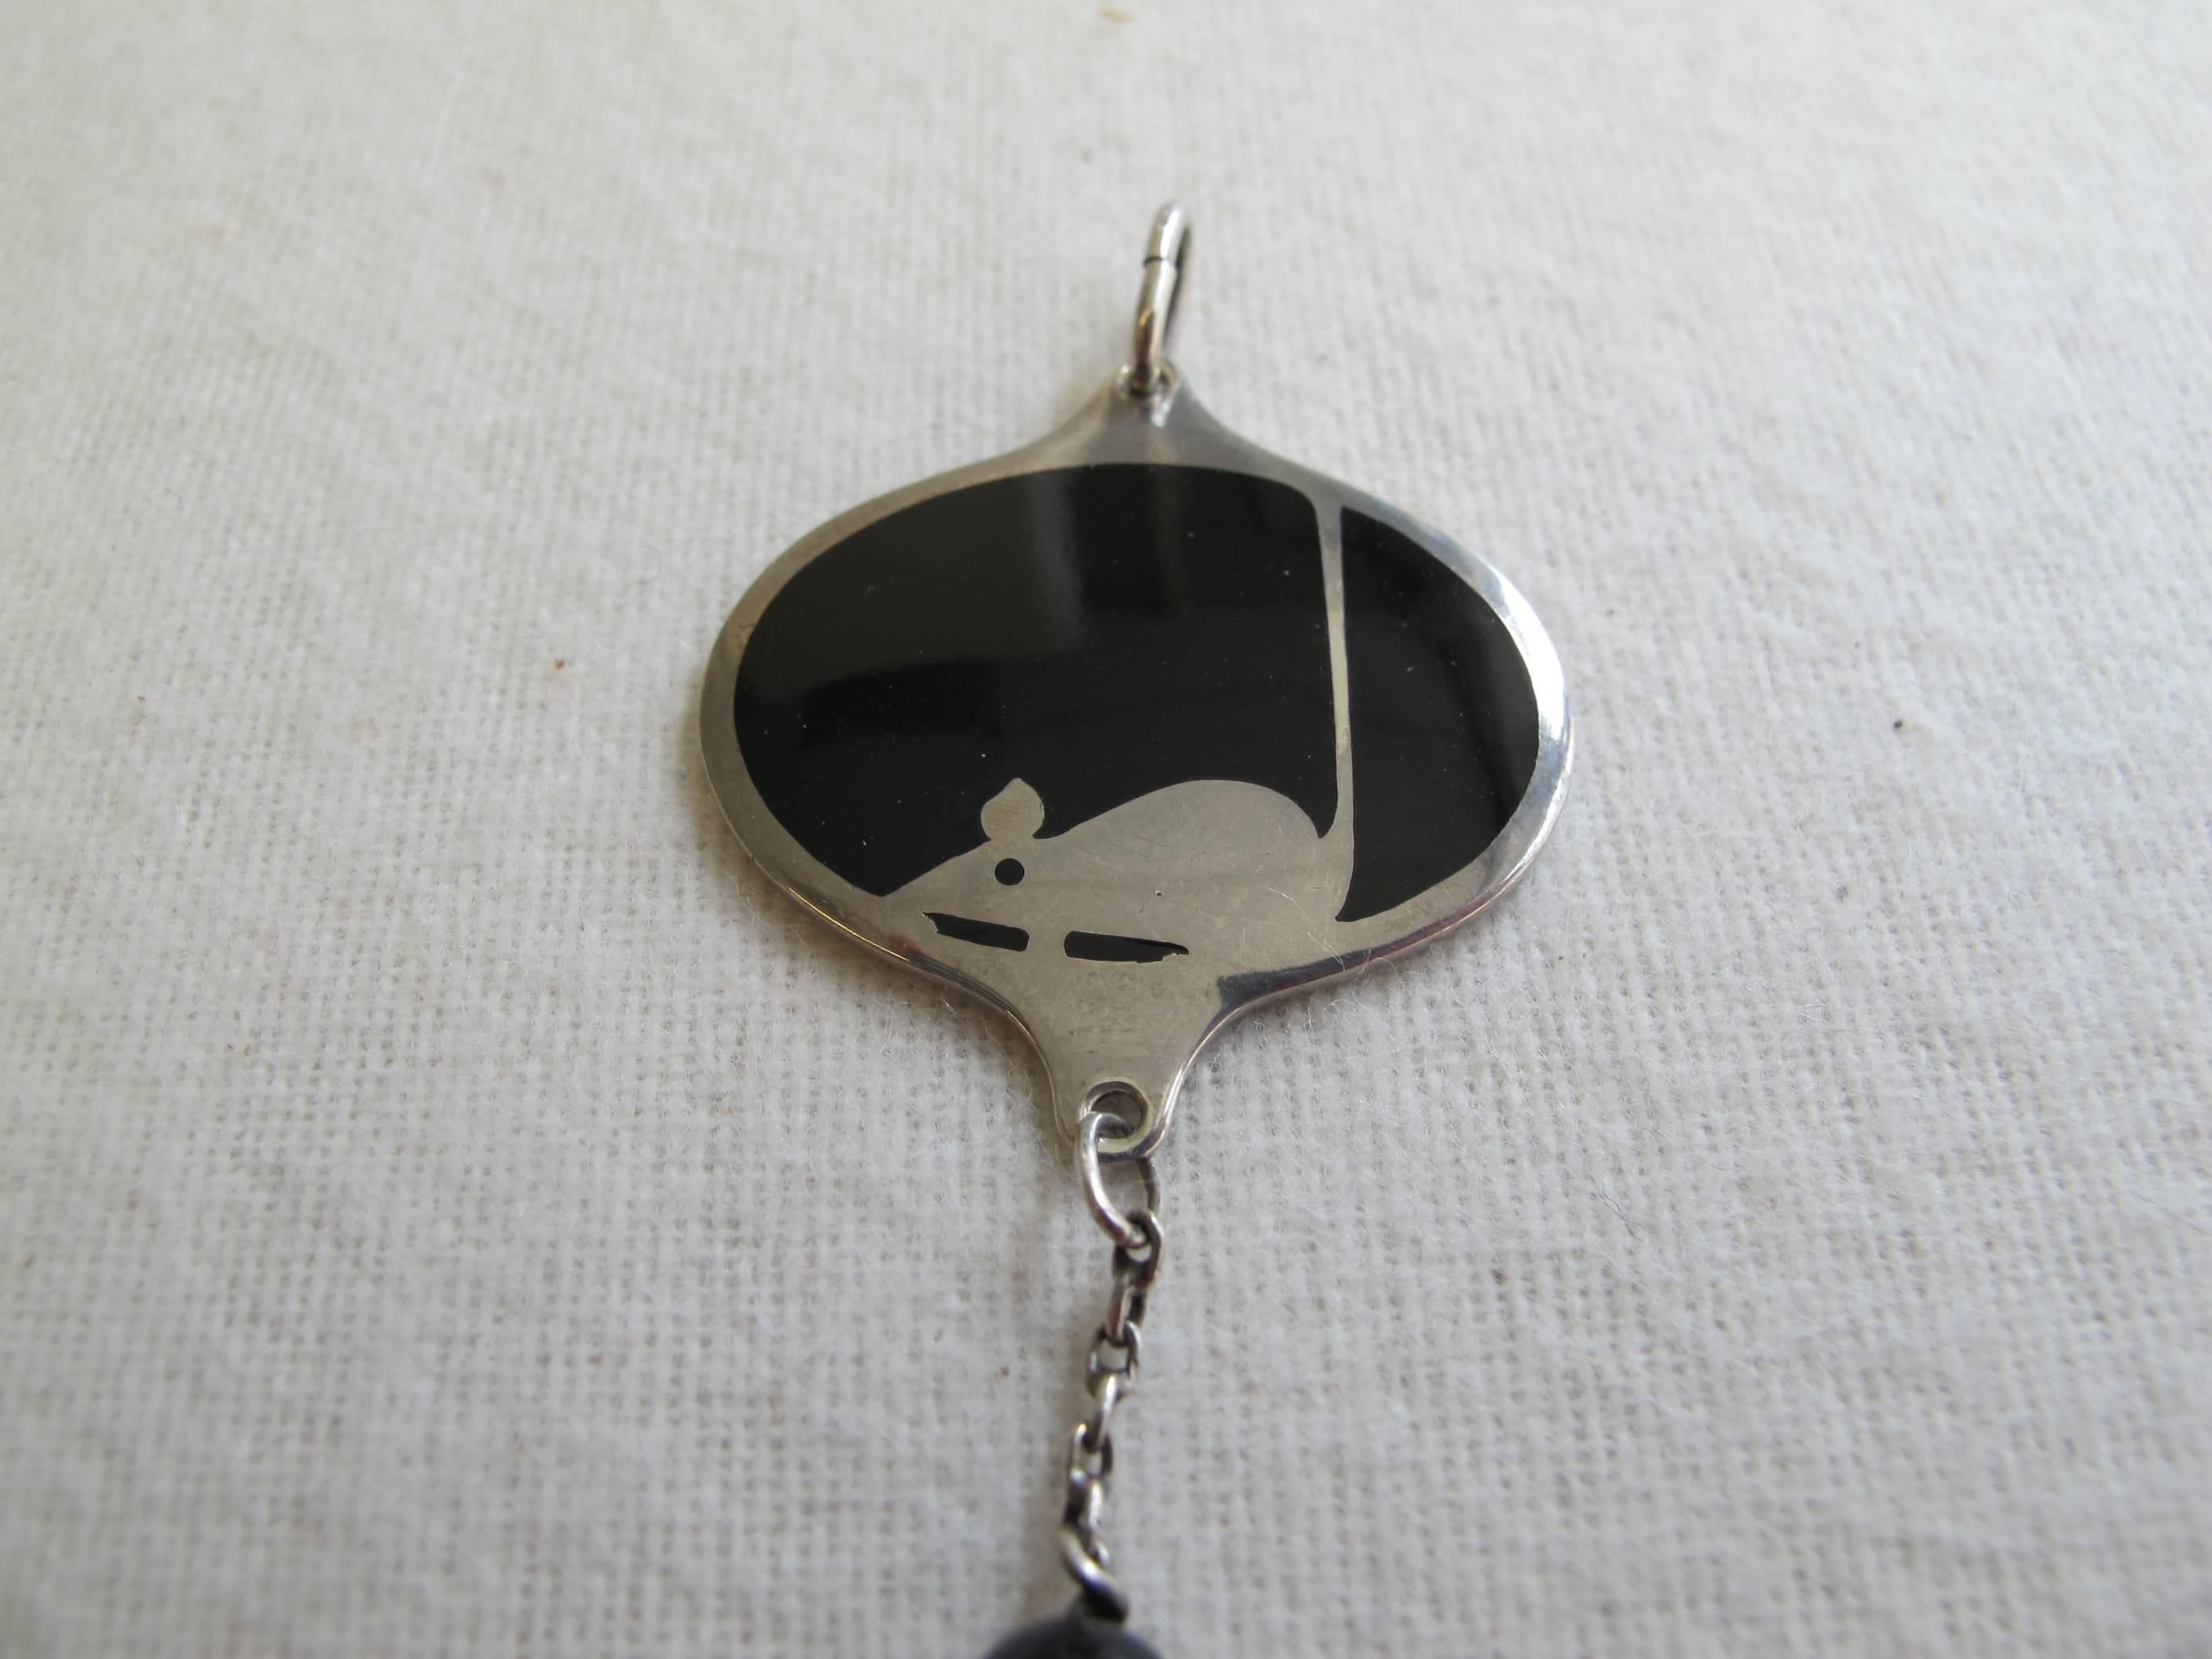 Koloman Moser (1868-1918) designed this silver pendant decorated with a mouse during his time at the Wiener Werkstätte in 1904. The silver mouse is embedded in black enamel in an oval shaped silver pendant and the chain is finished with a black